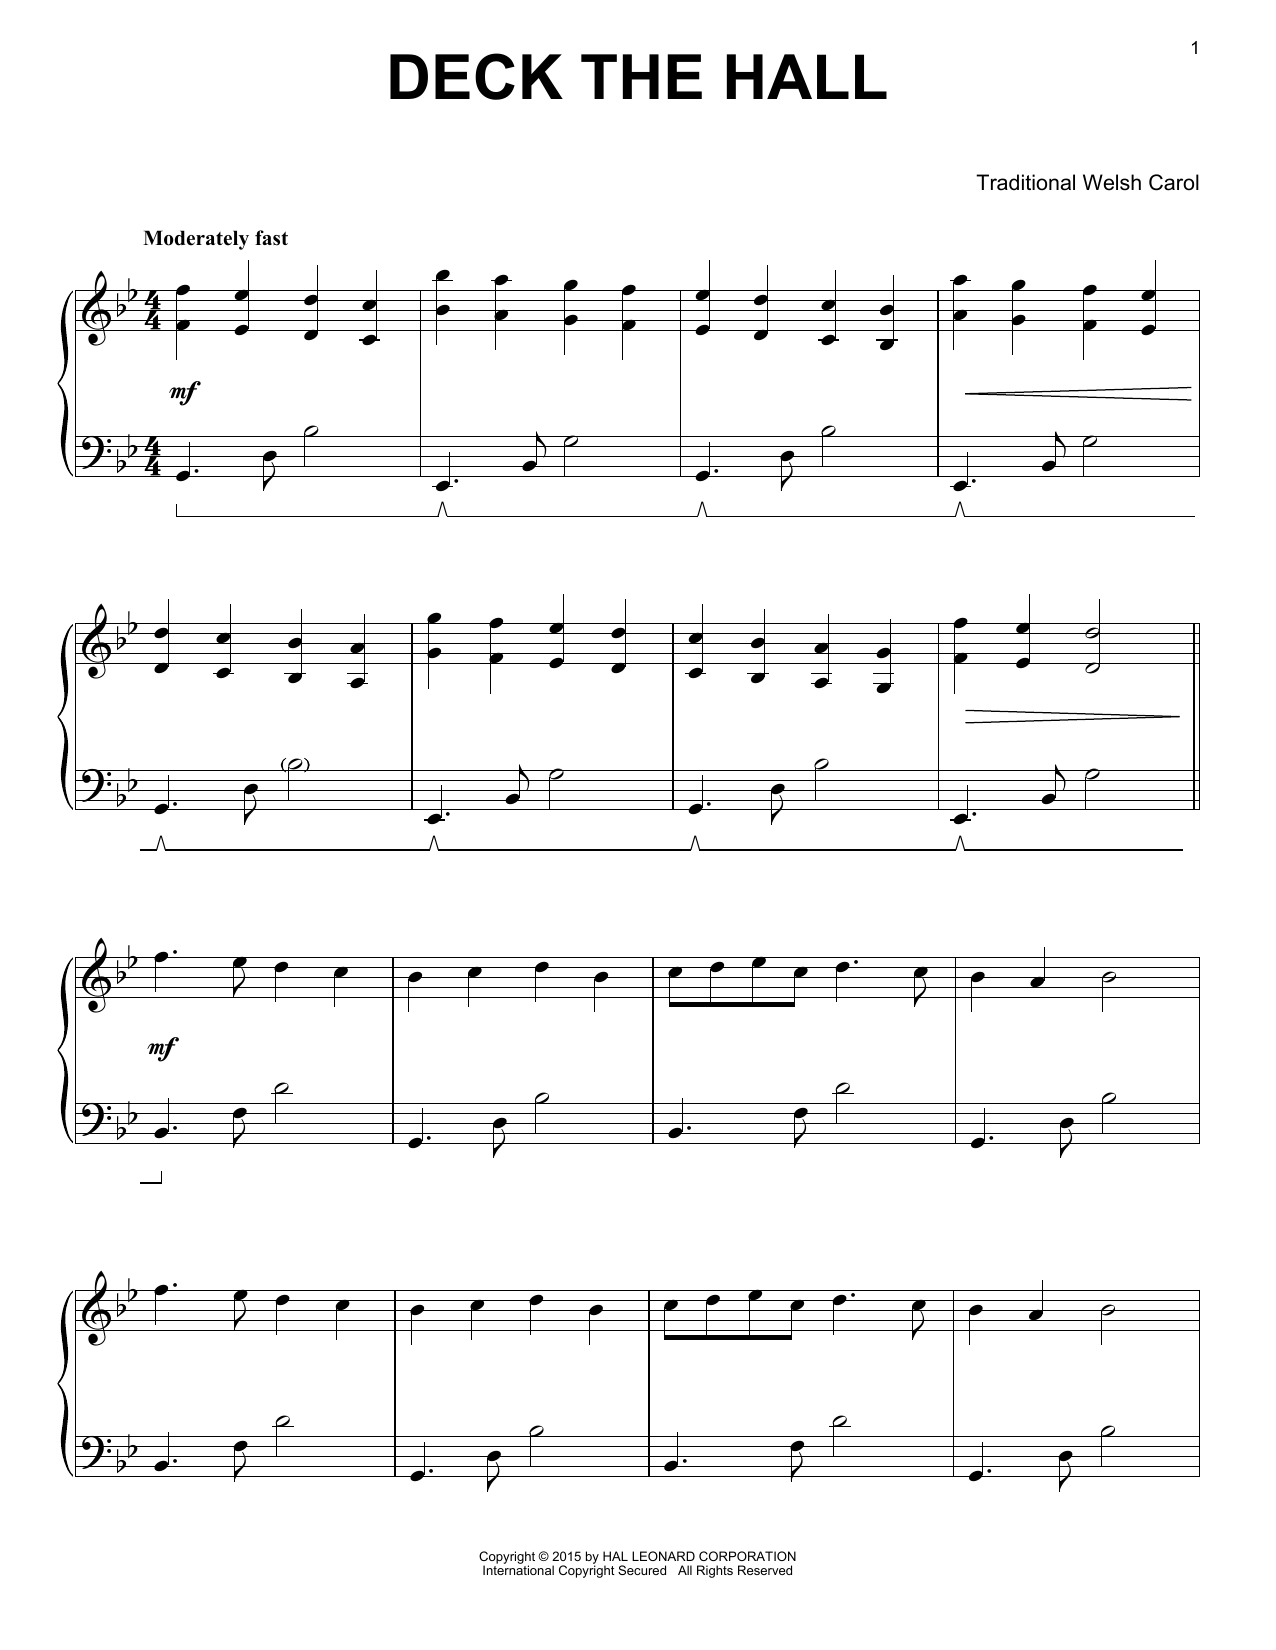 Download Traditional Carol Deck The Hall Sheet Music